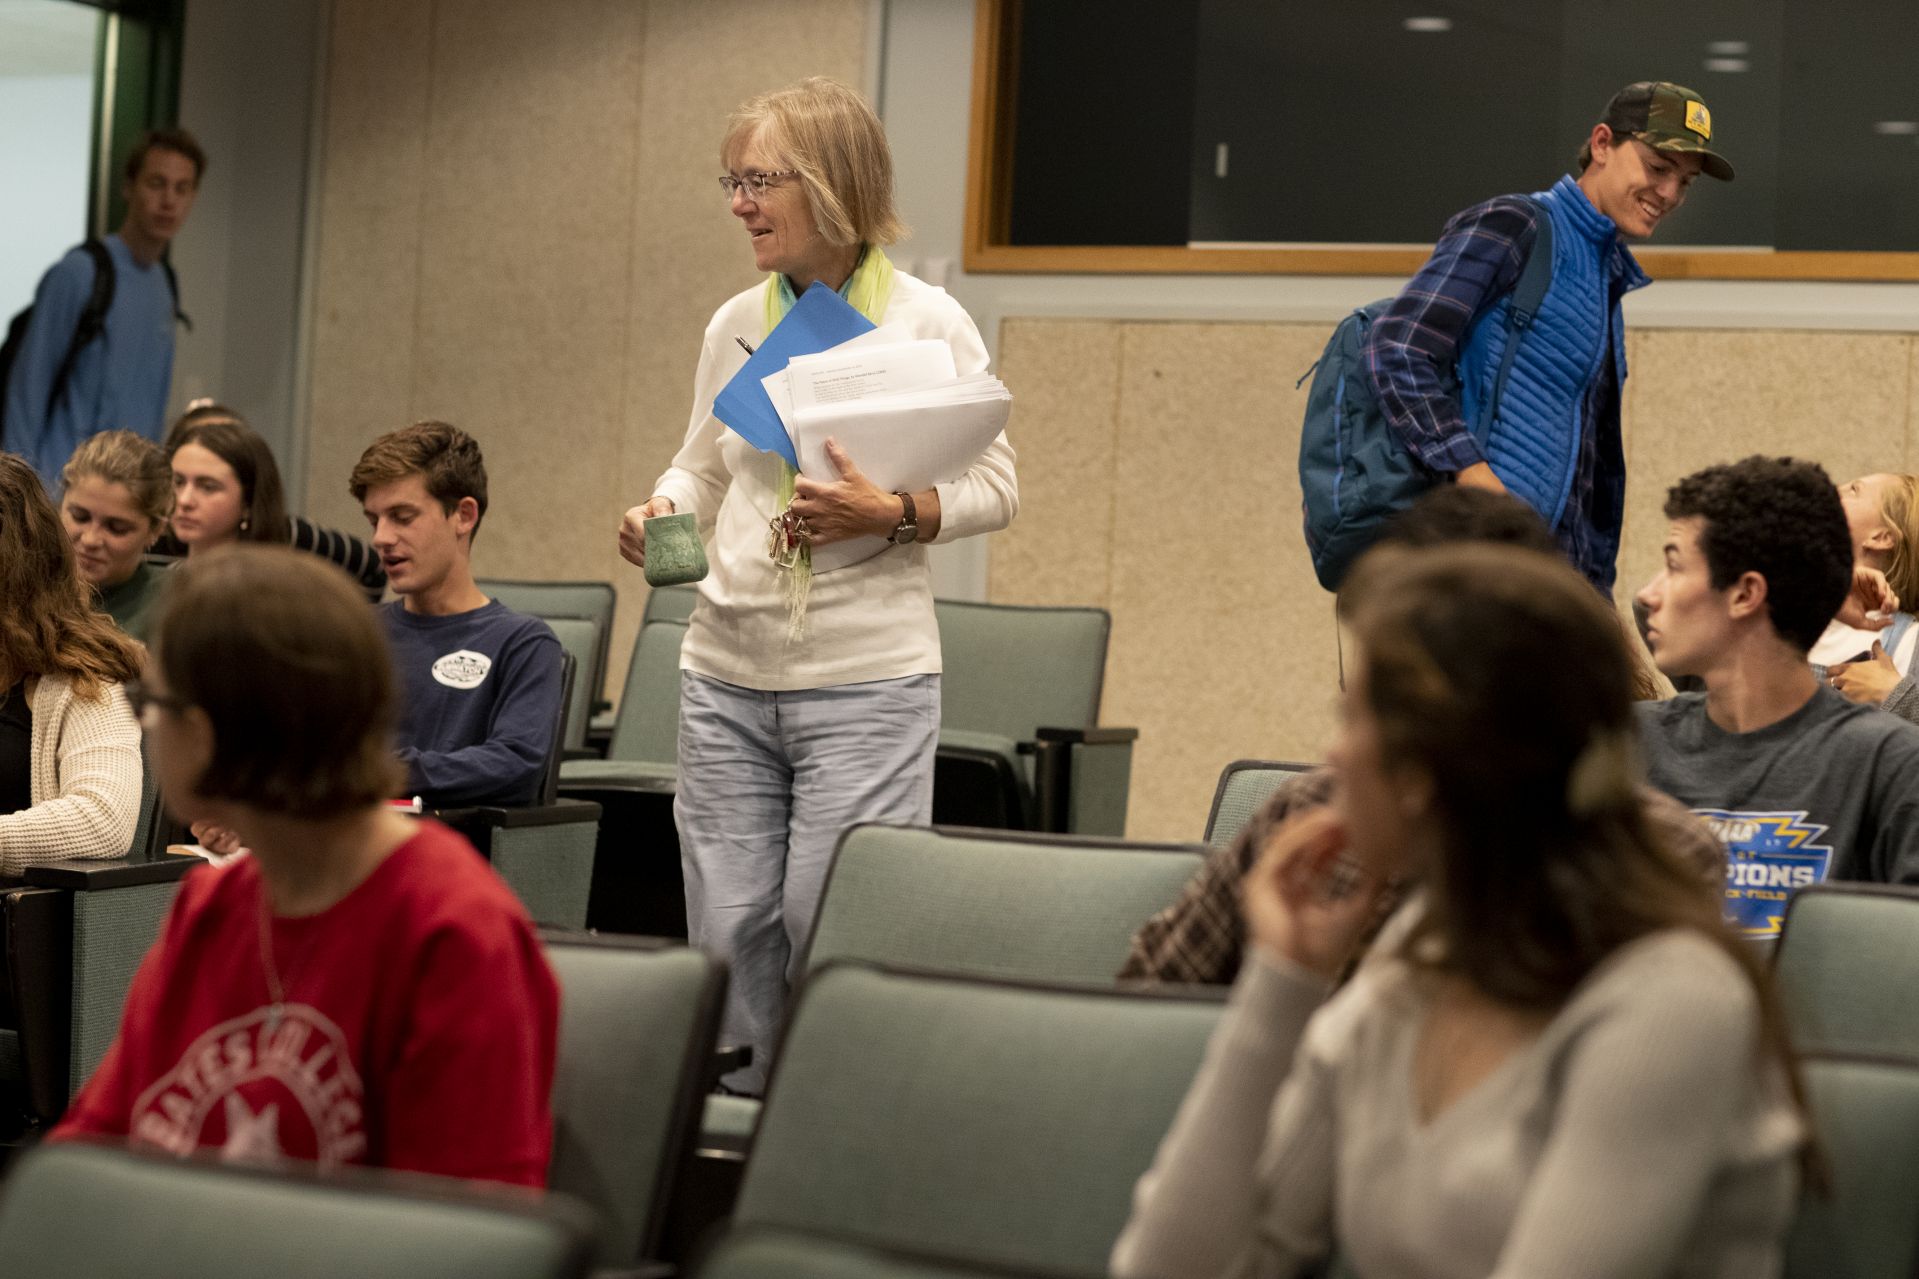 After a false start, Costlow arrives for her "Lives in Place" class in Olin Arts Center. (Phyllis Graber Jensen/Bates College)